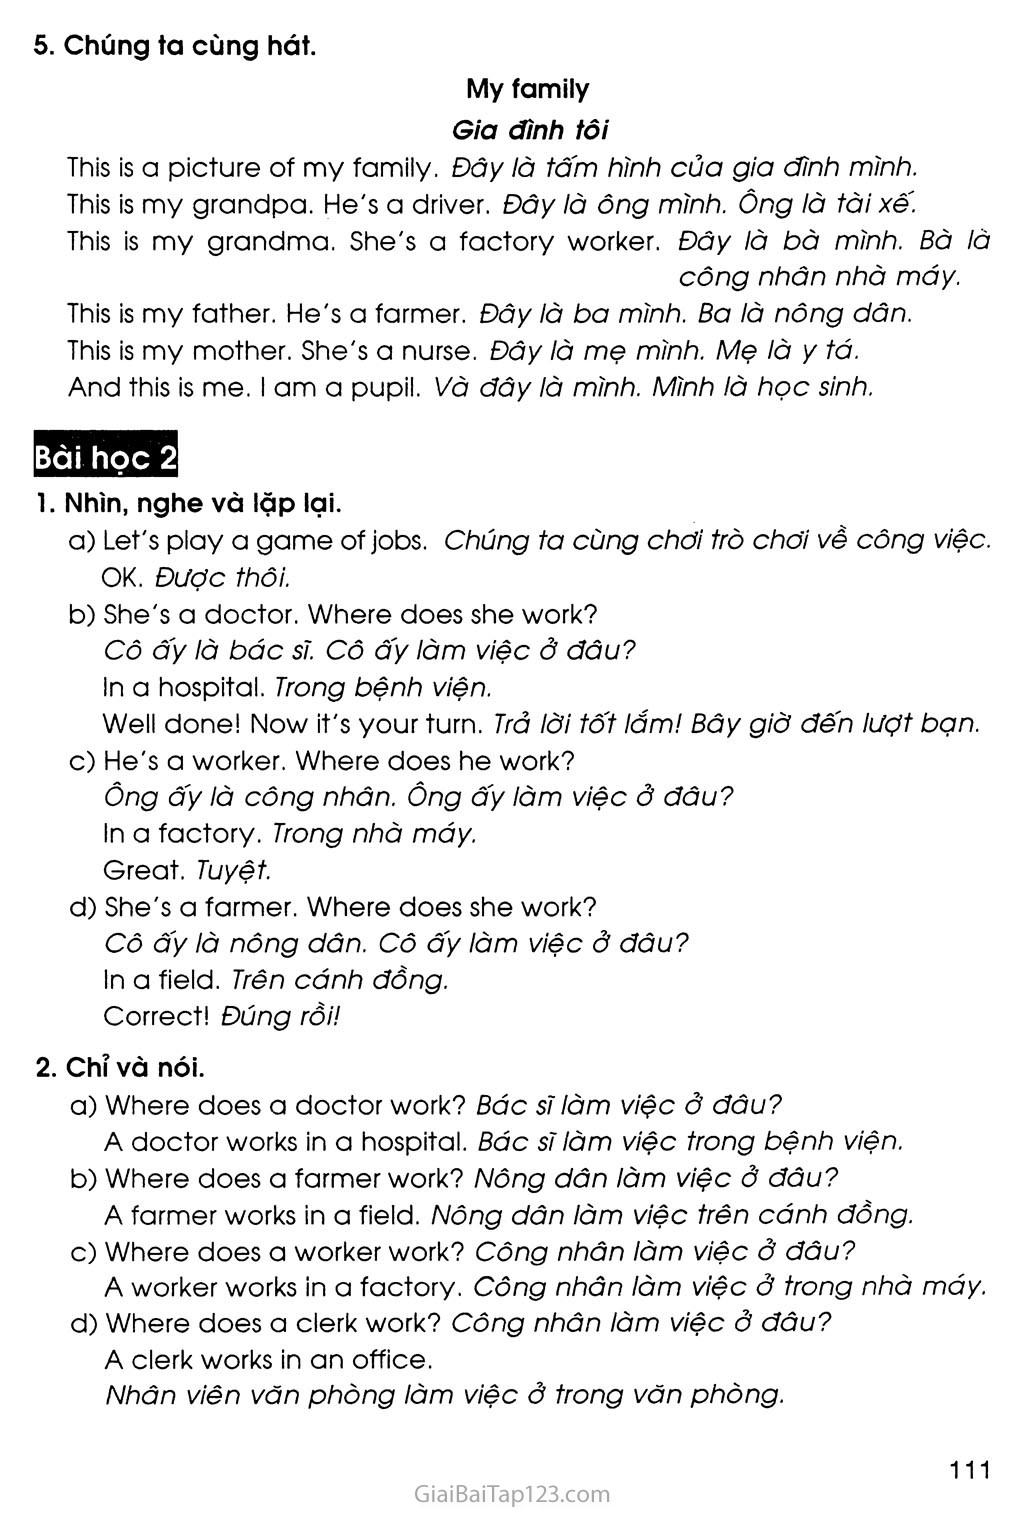 UNIT 12: WHAT DOES YOUR FATHER DO? trang 5